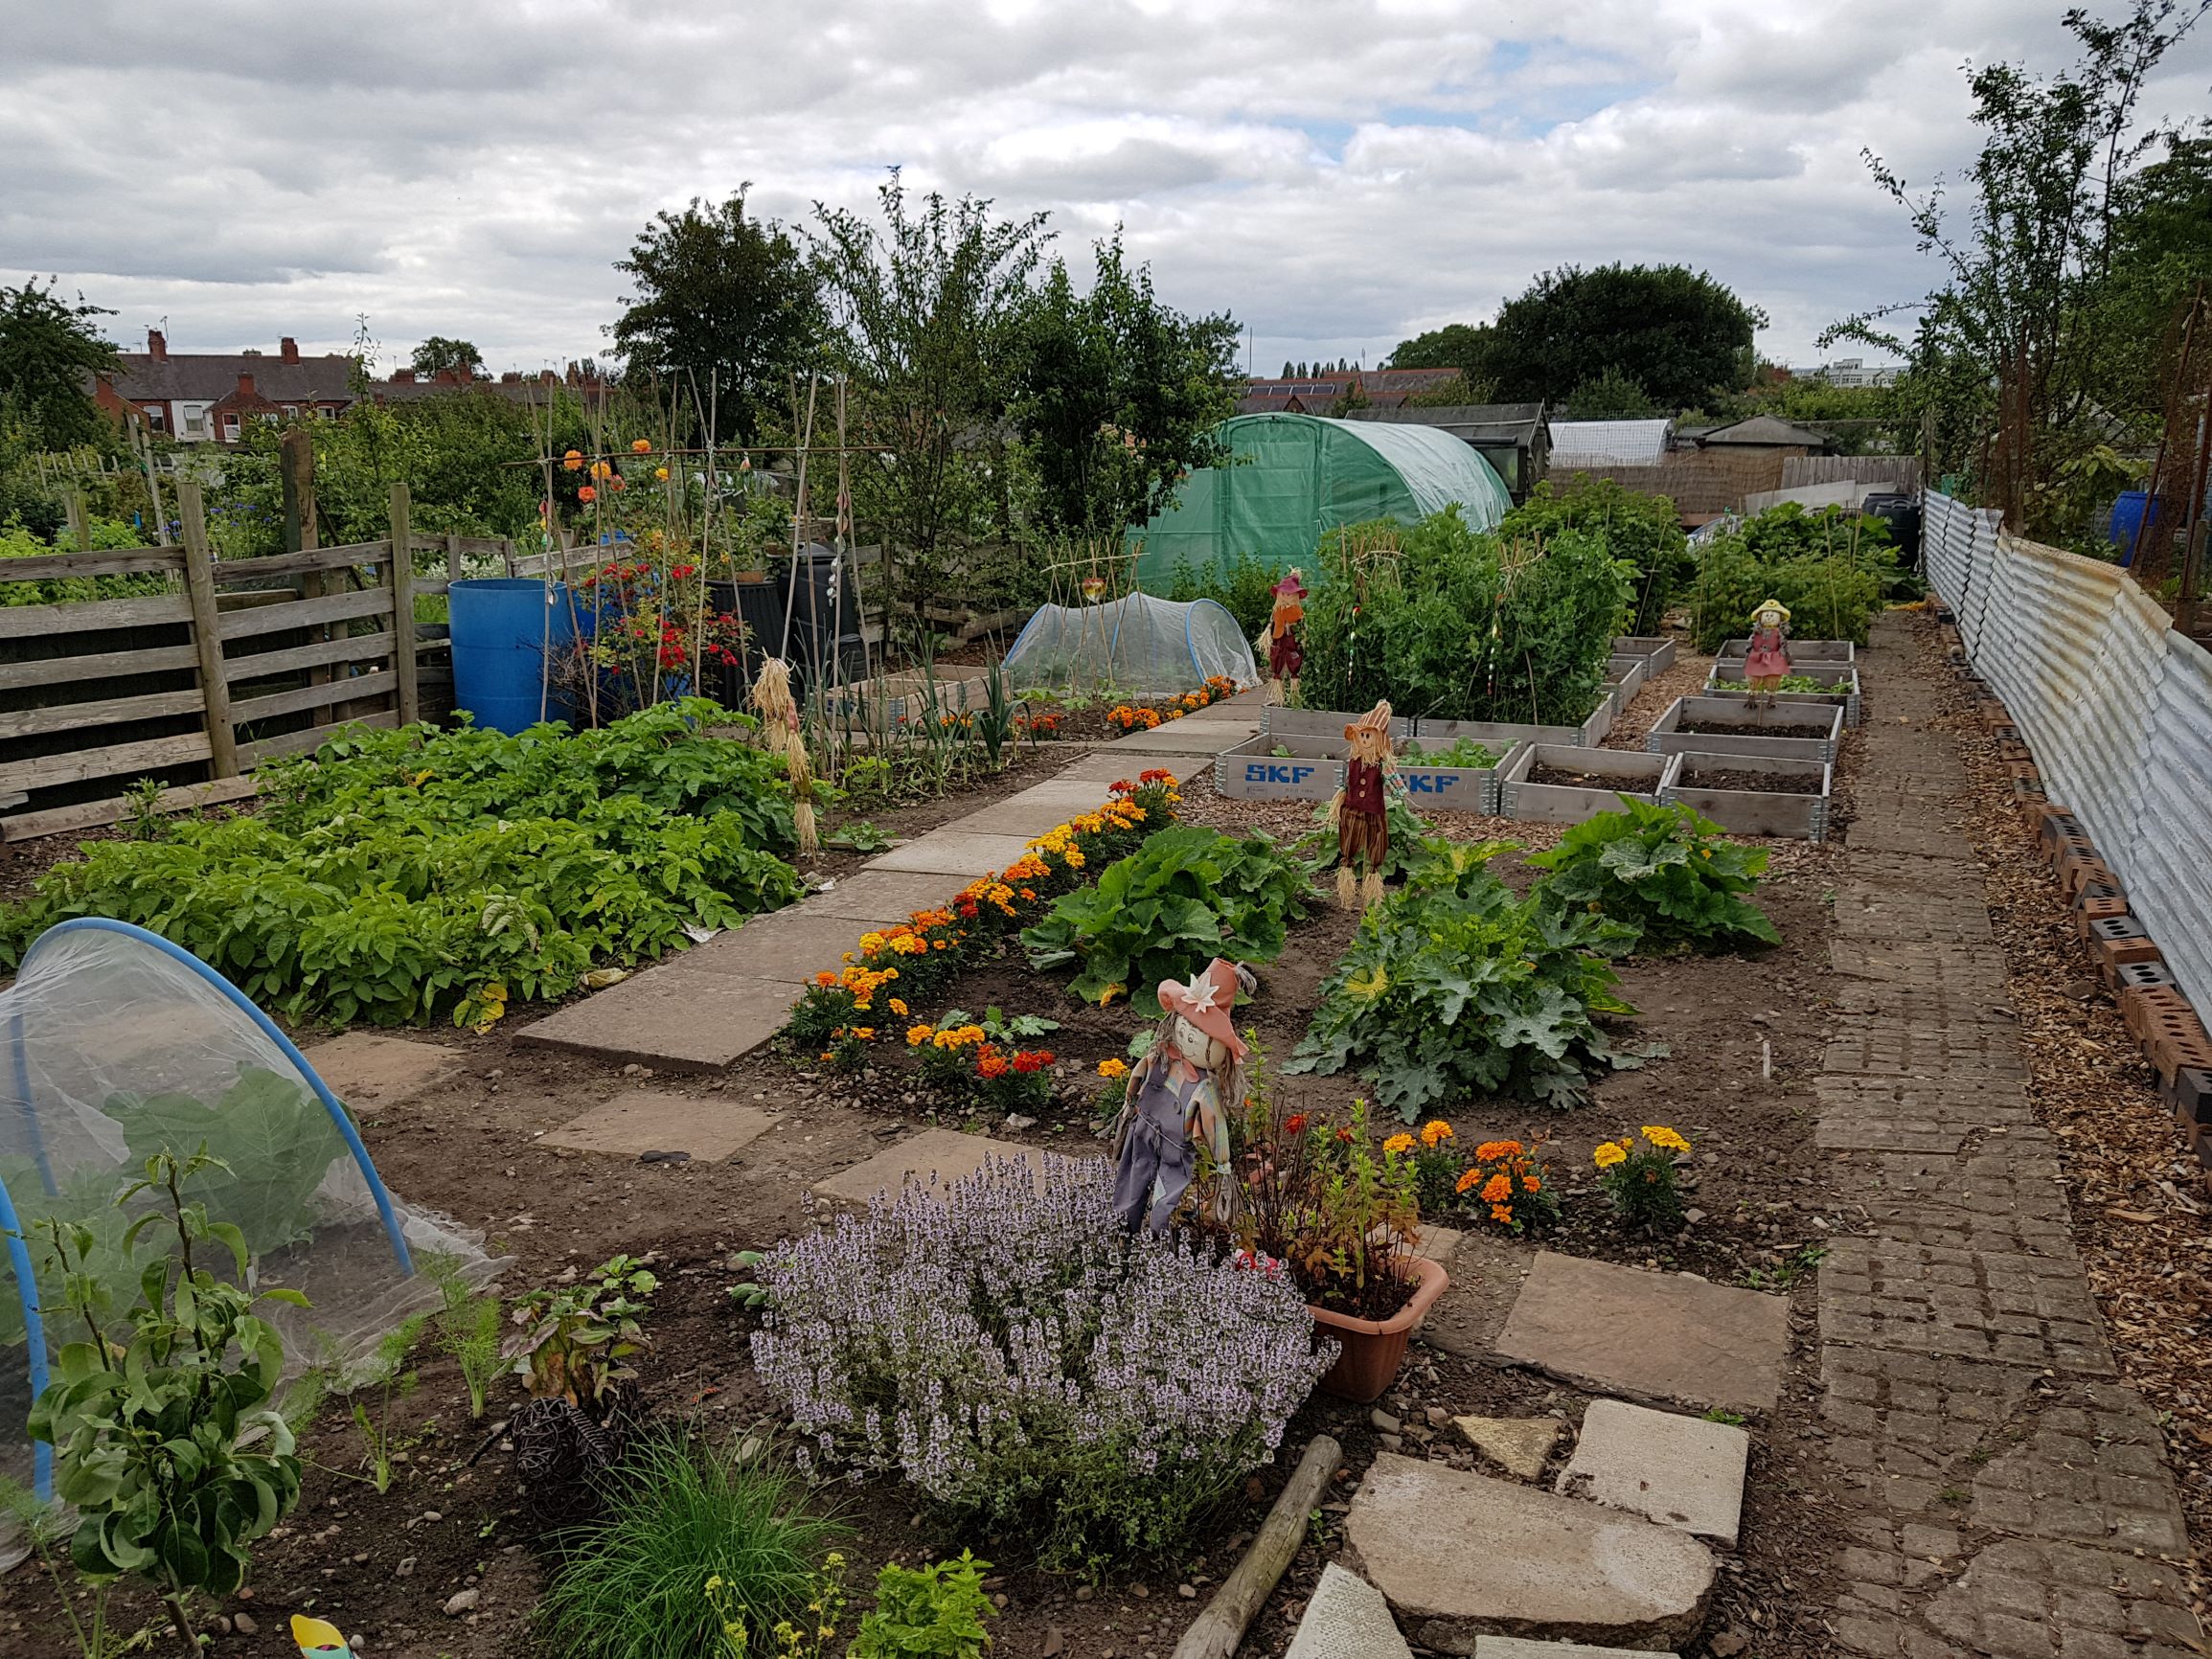 Take a look at Erddig Allotments